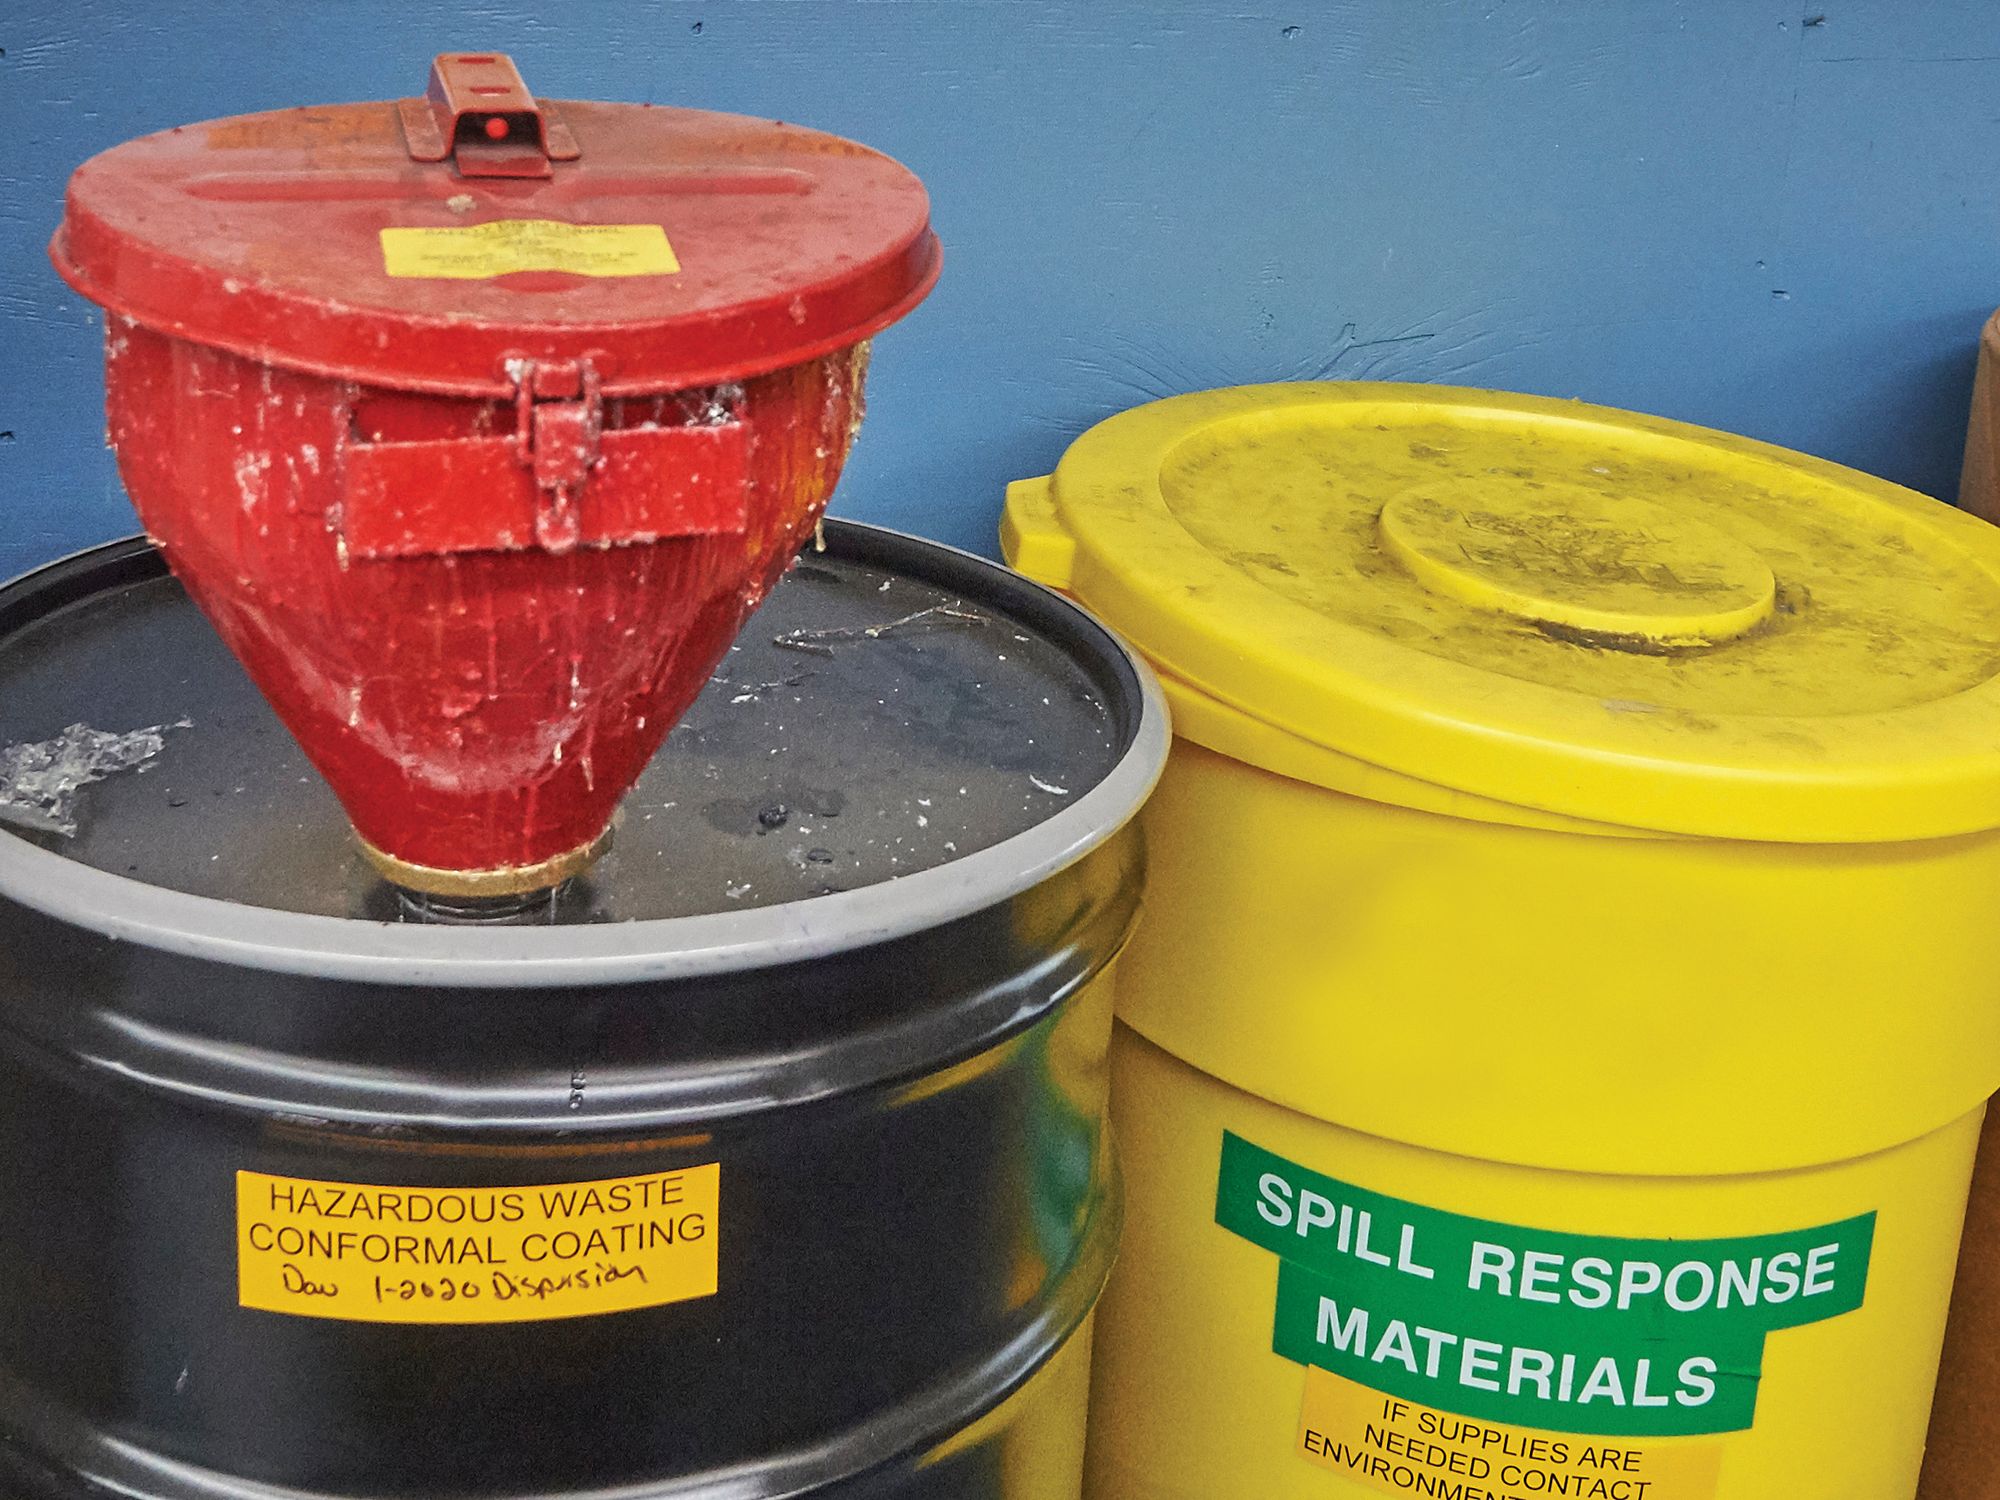 Marking and labeling of containers